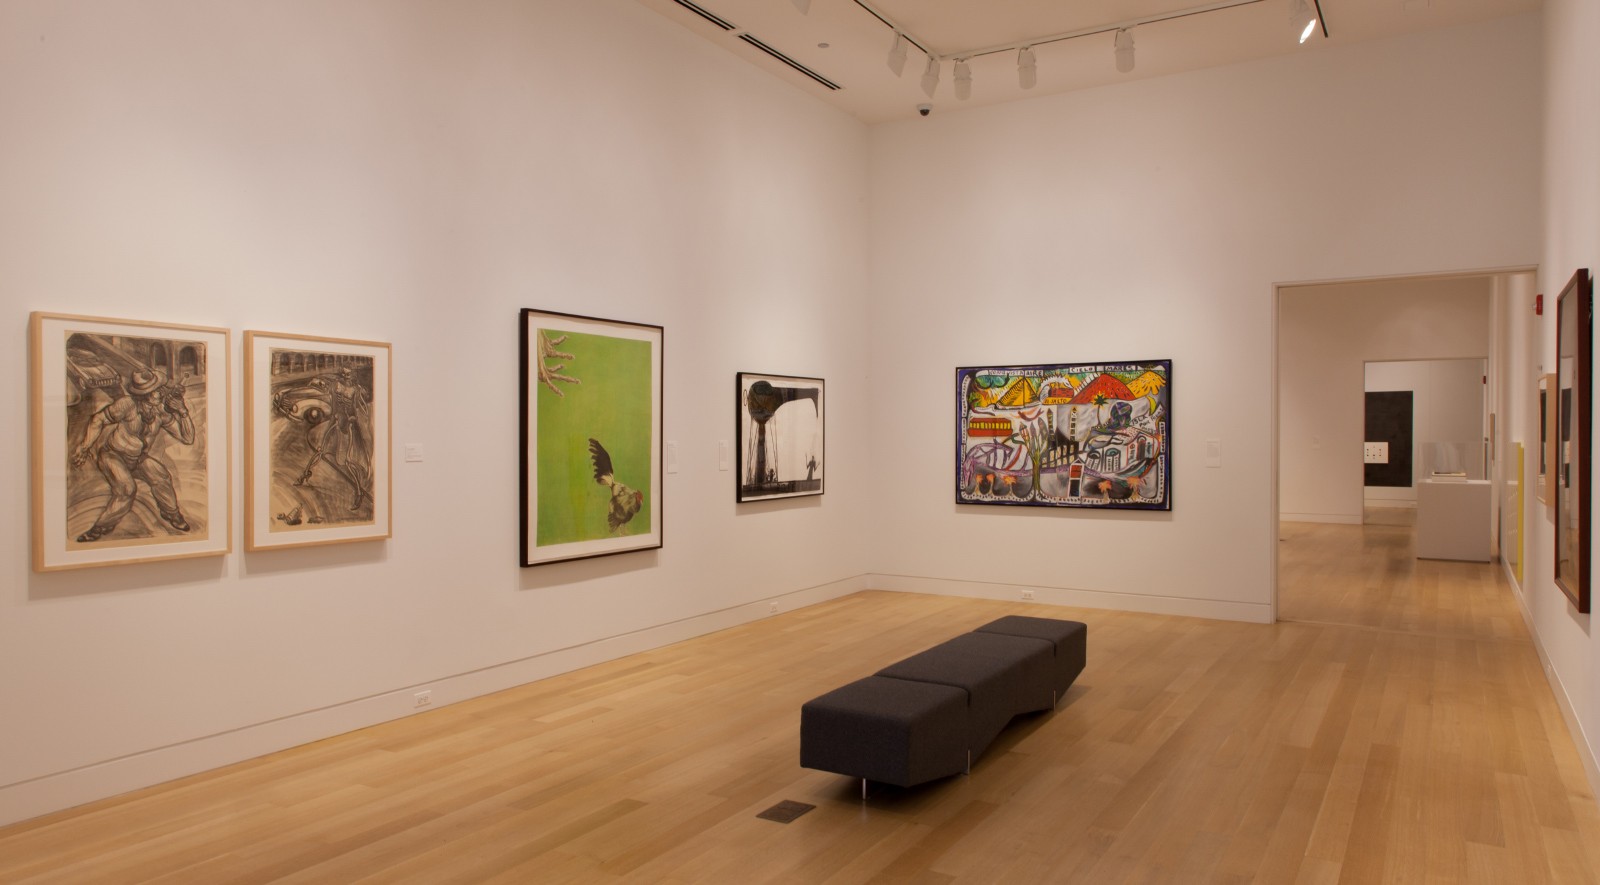 Installation view of "Nexo/Nexus: Latin American Connections in the Midwest"